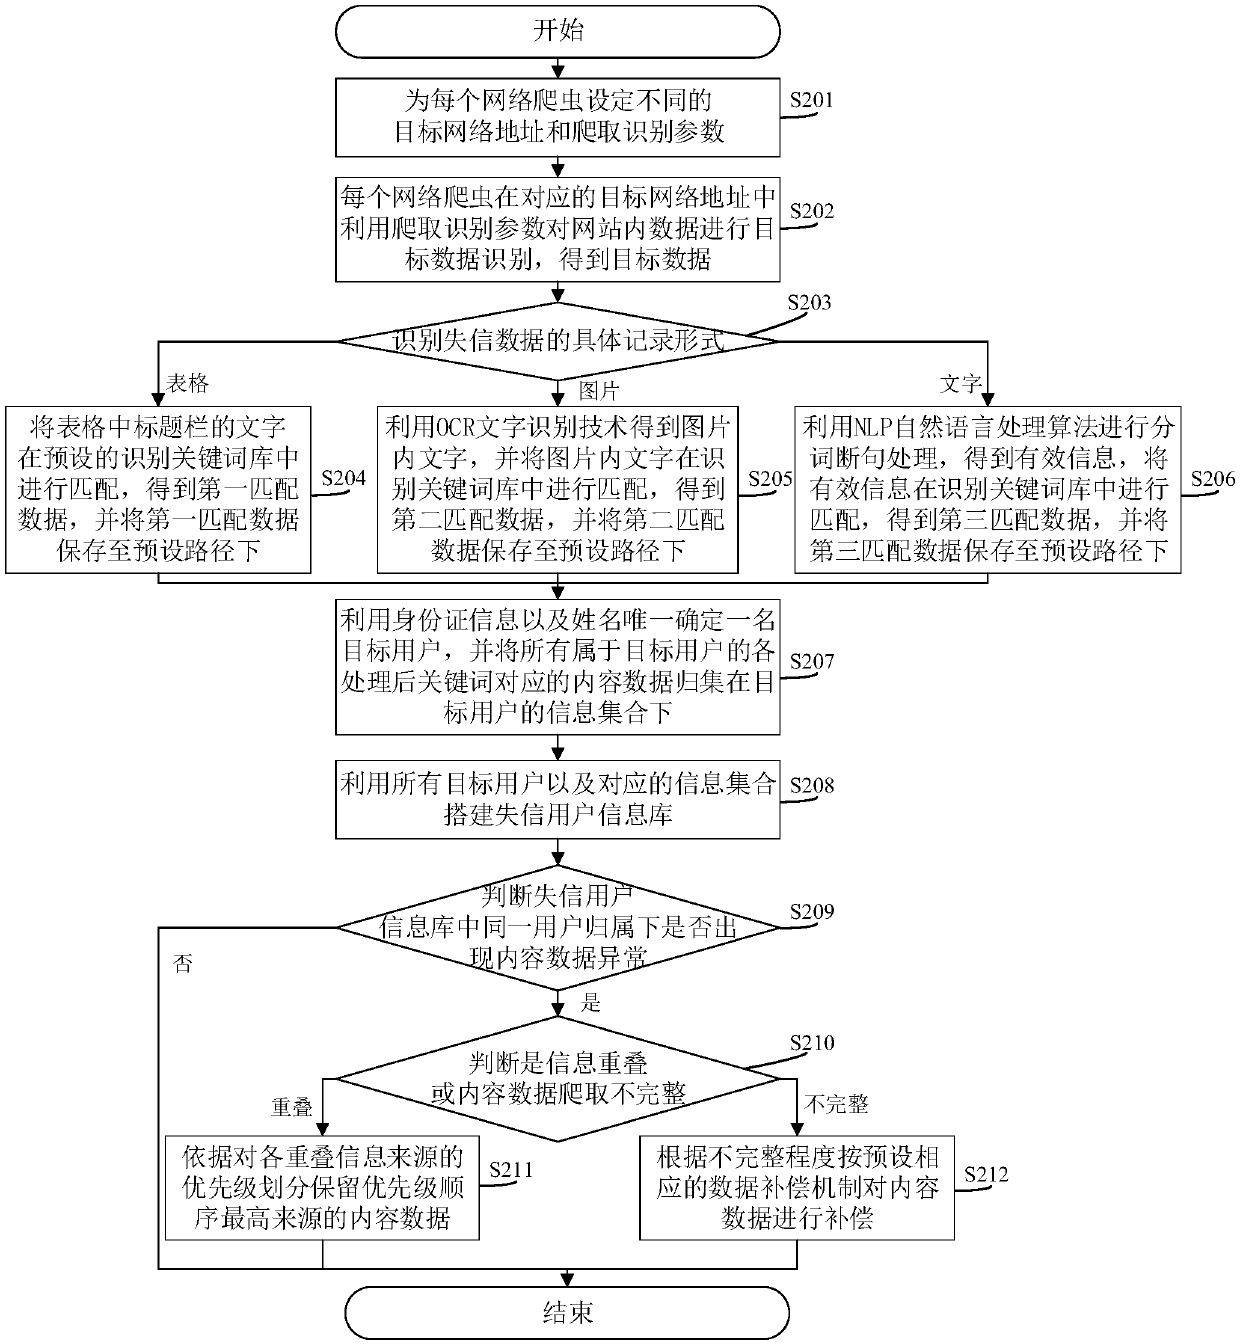 Untrusted user data processing method, system and related apparatus